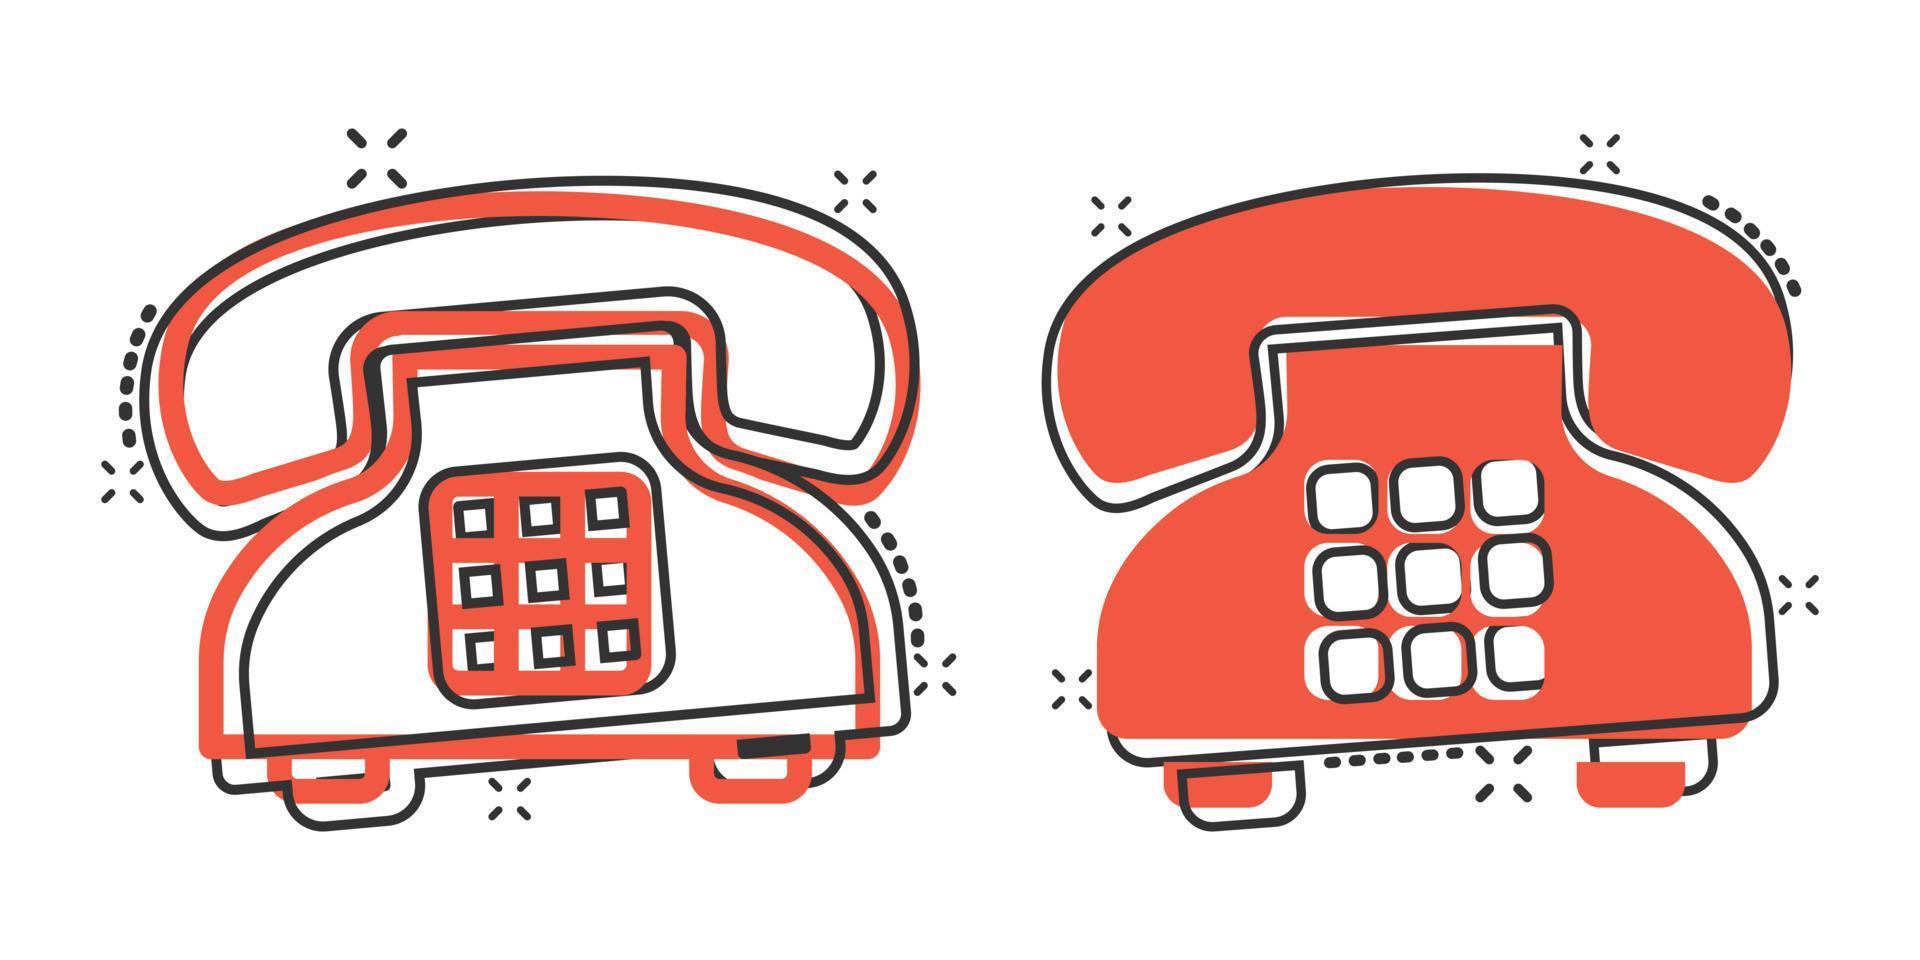 Mobile phone icon in comic style. Telephone talk cartoon vector illustration on white isolated background. Hotline contact splash effect business concept.